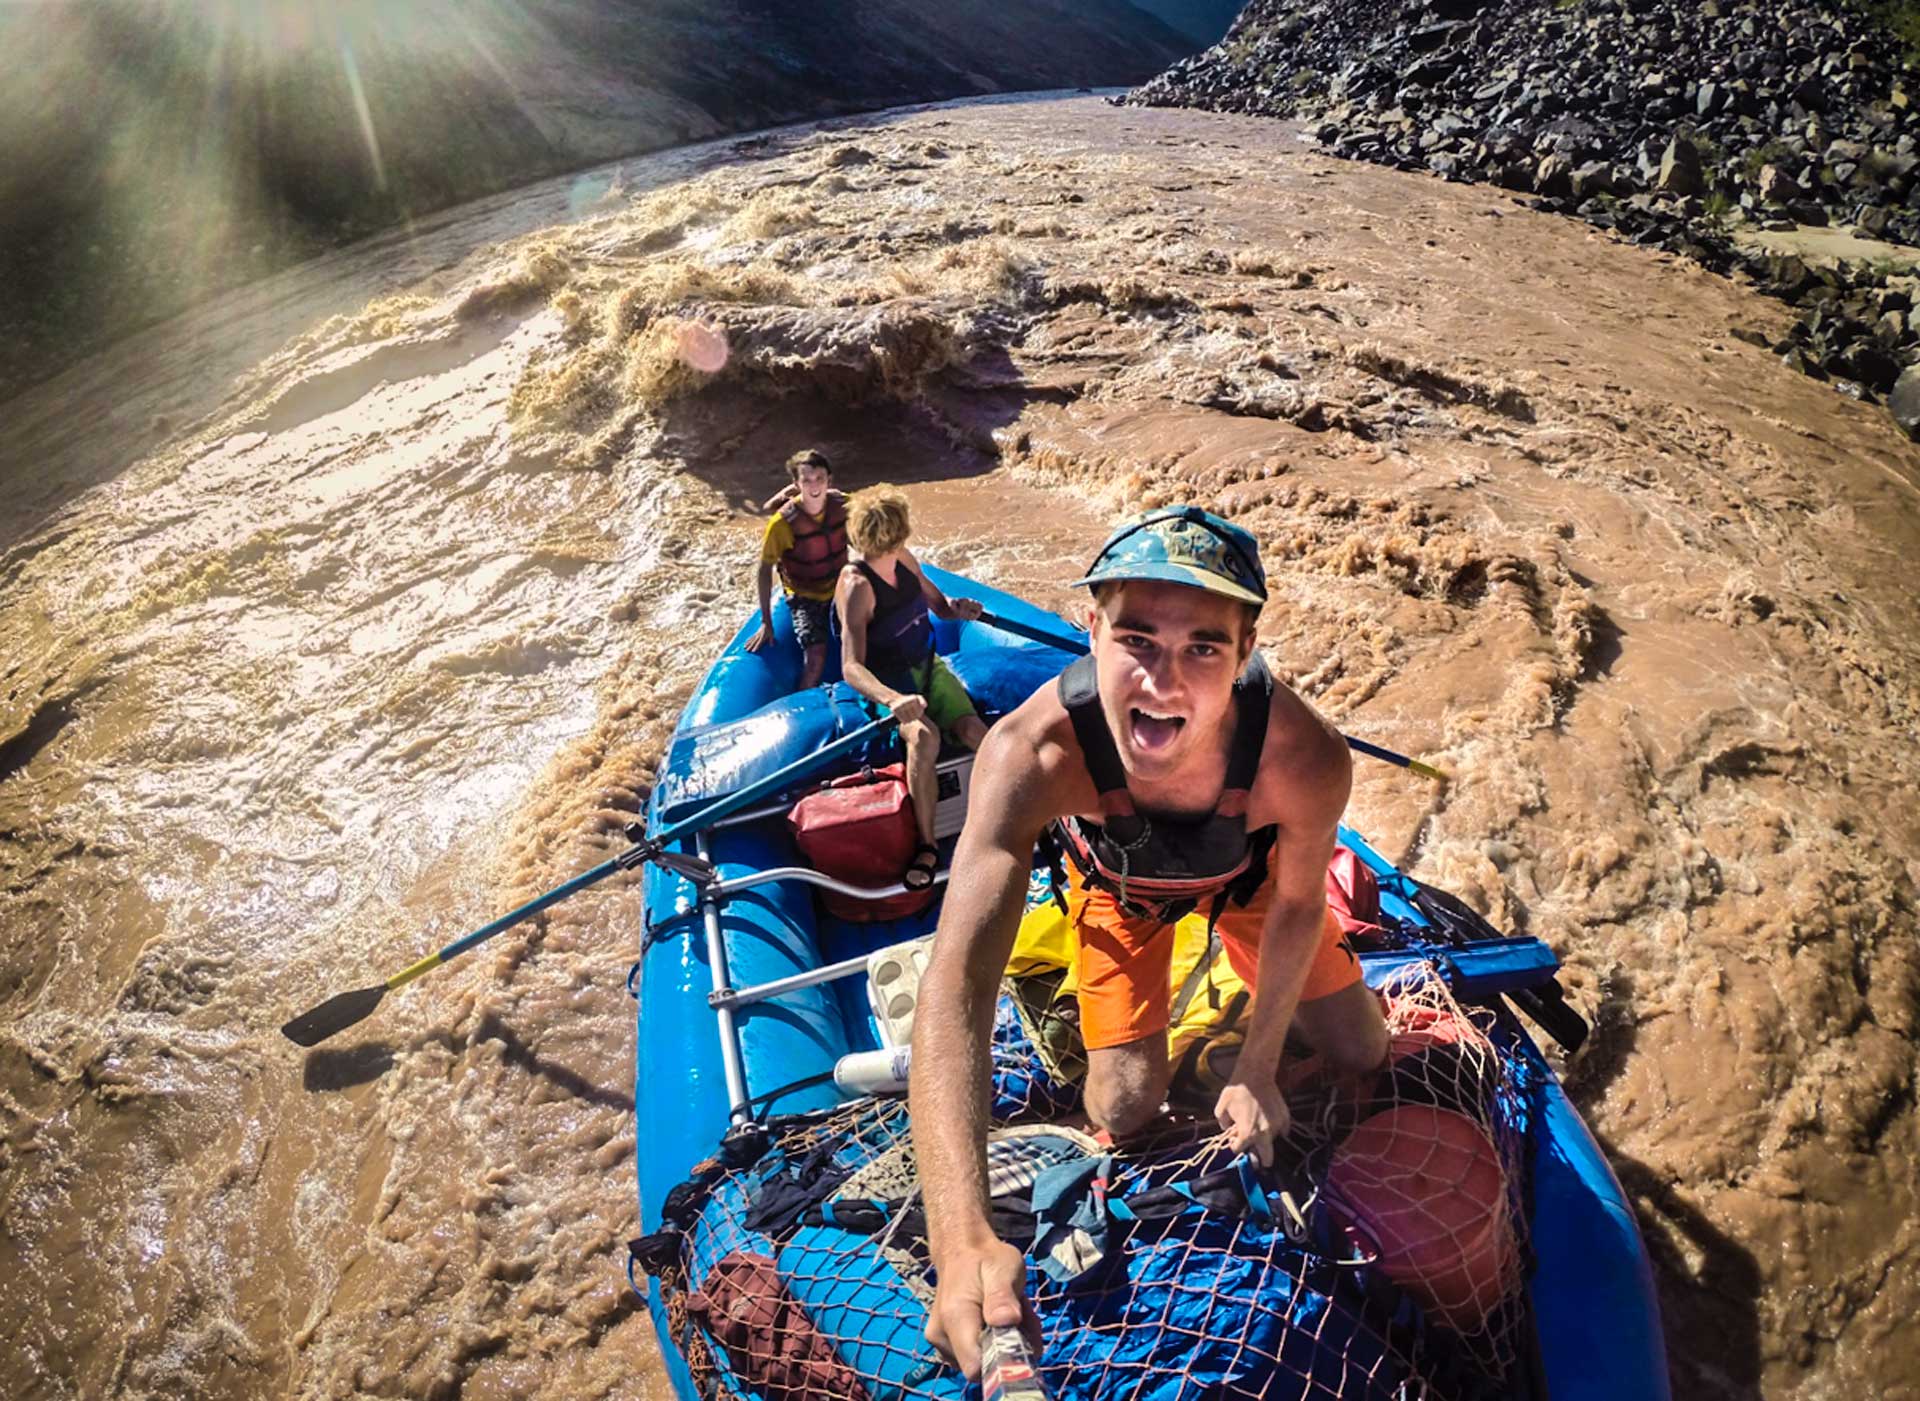 Selfie of group while rafting on the Colorado River during a river gear rental trip in the Grand Canyon in Arizona.